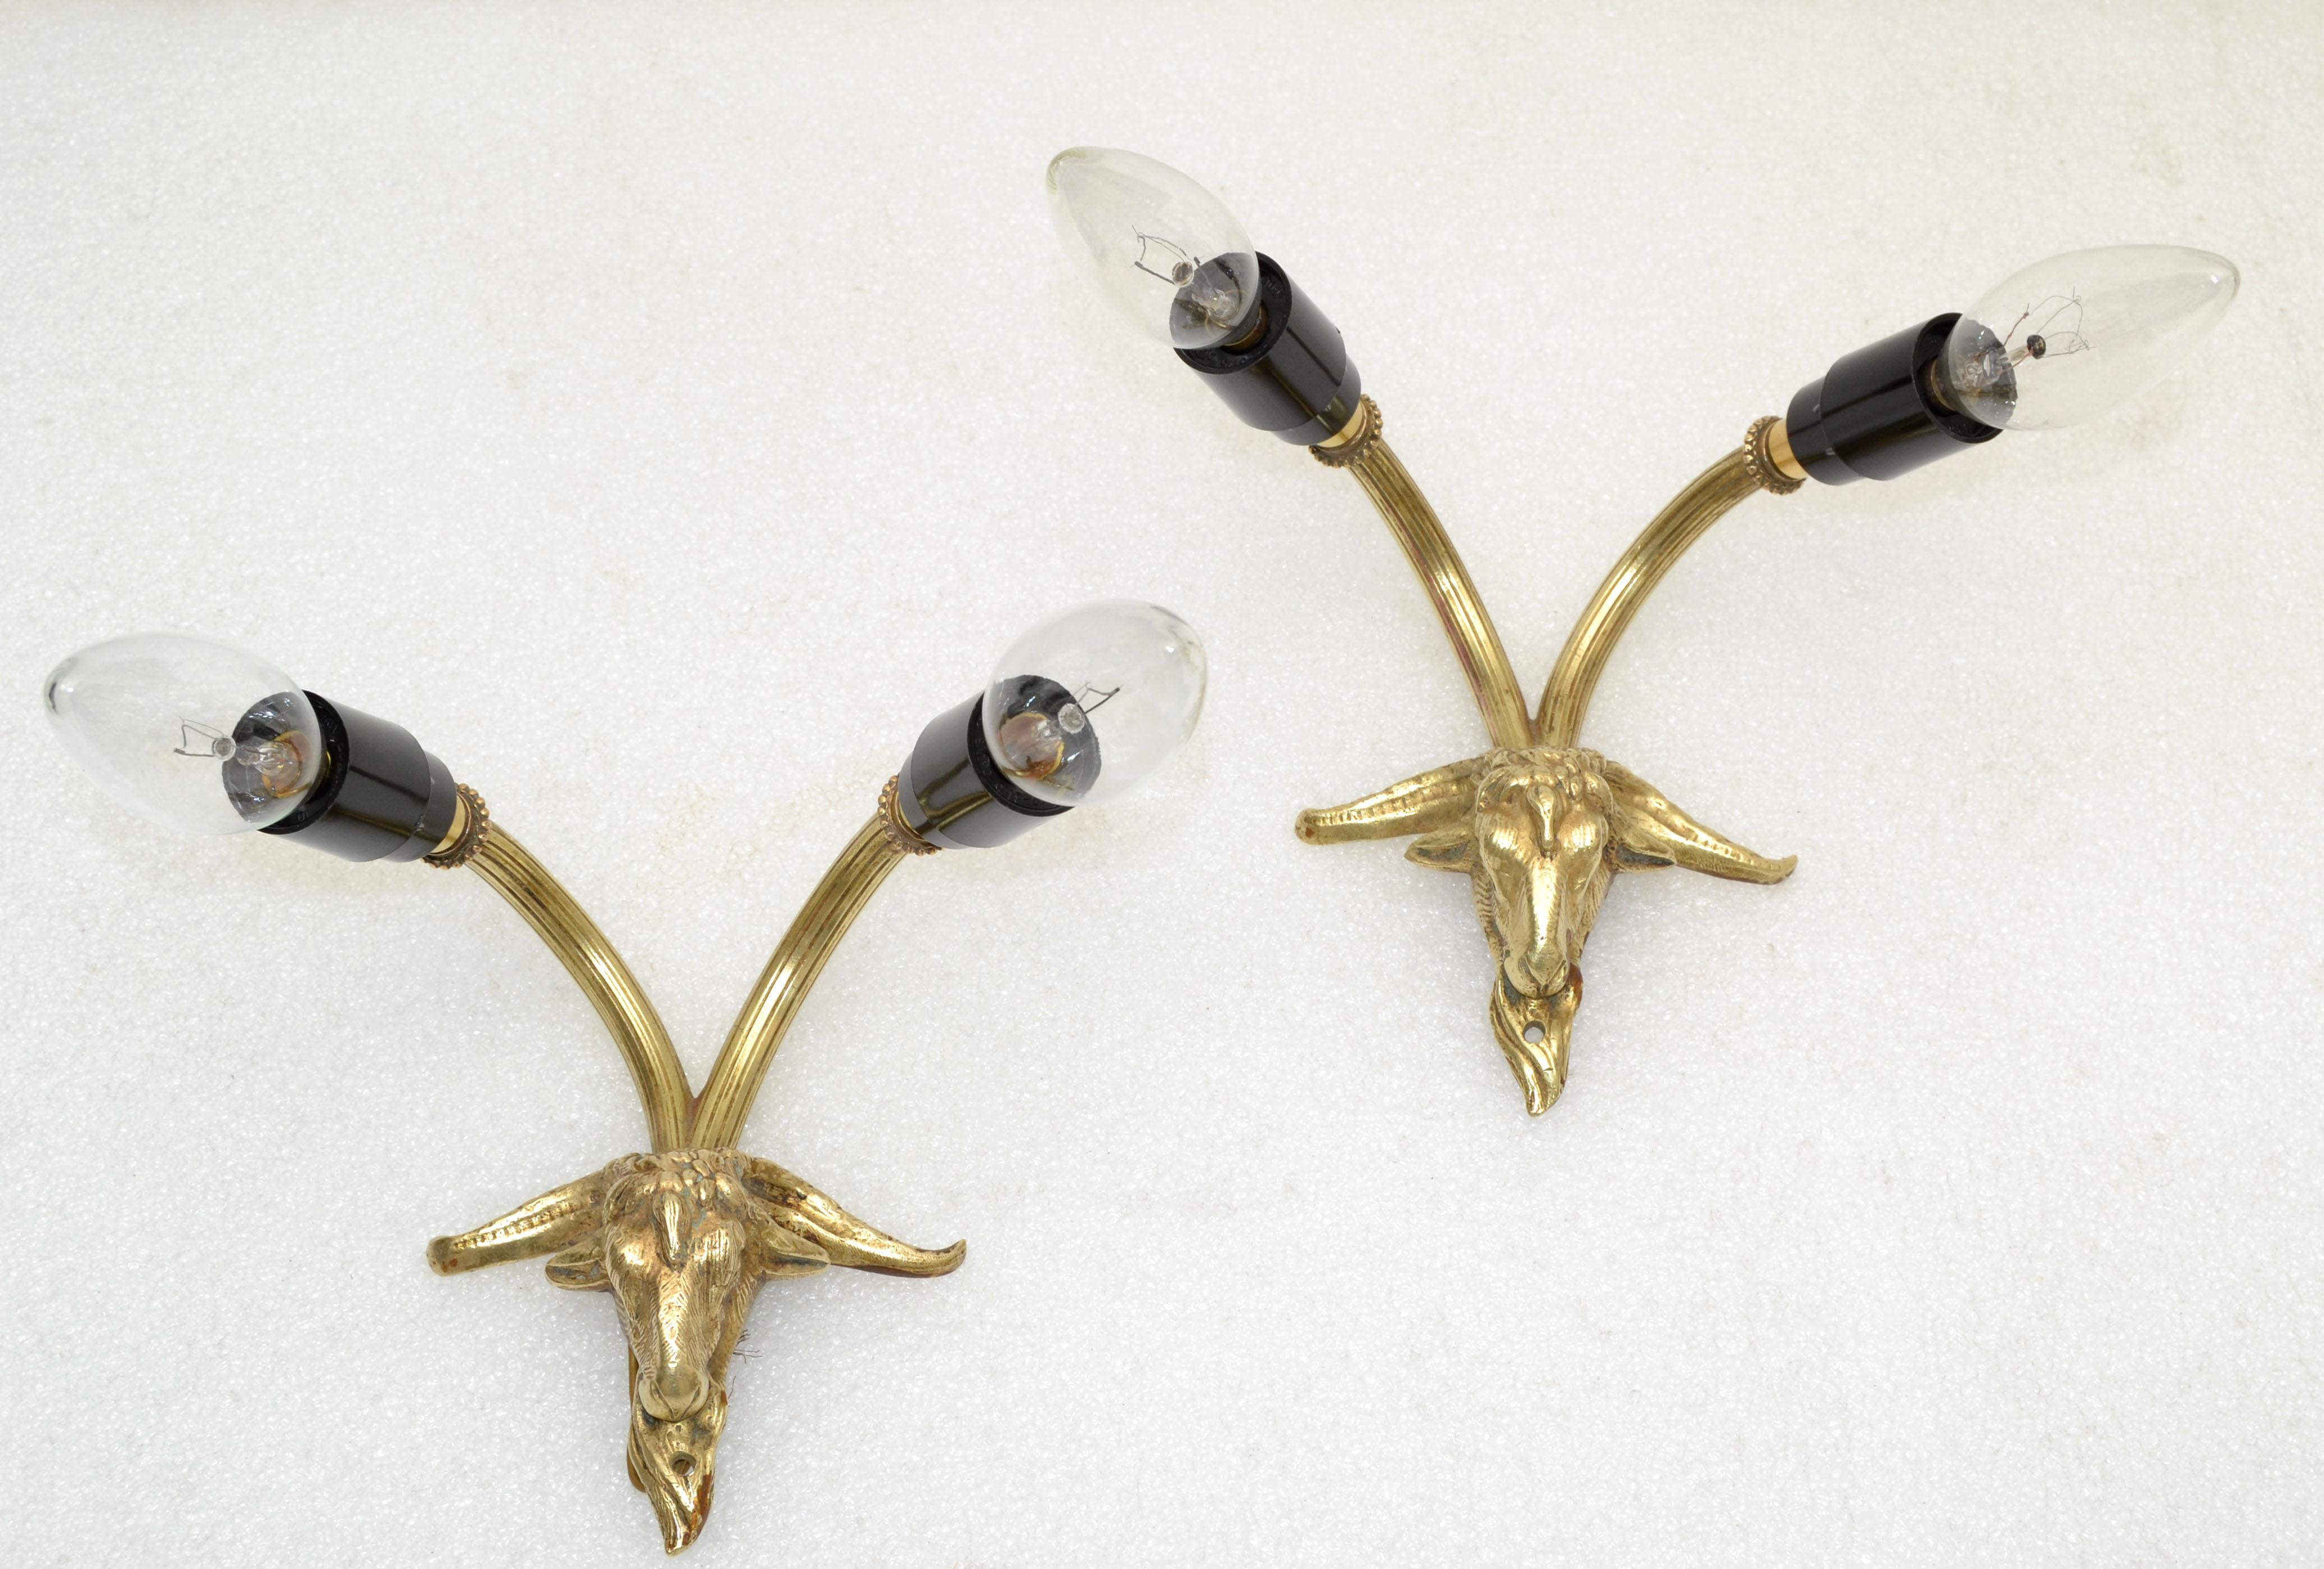 Pair of French Neoclassical 2 lights bronze goat sconces from the 1960.
US Rewiring and each takes 2 candelabra light bulb max. 40 watts.
Back-plate: 1.25 x 3 inches. Junction box cover in 5 inches diameter available for an additional